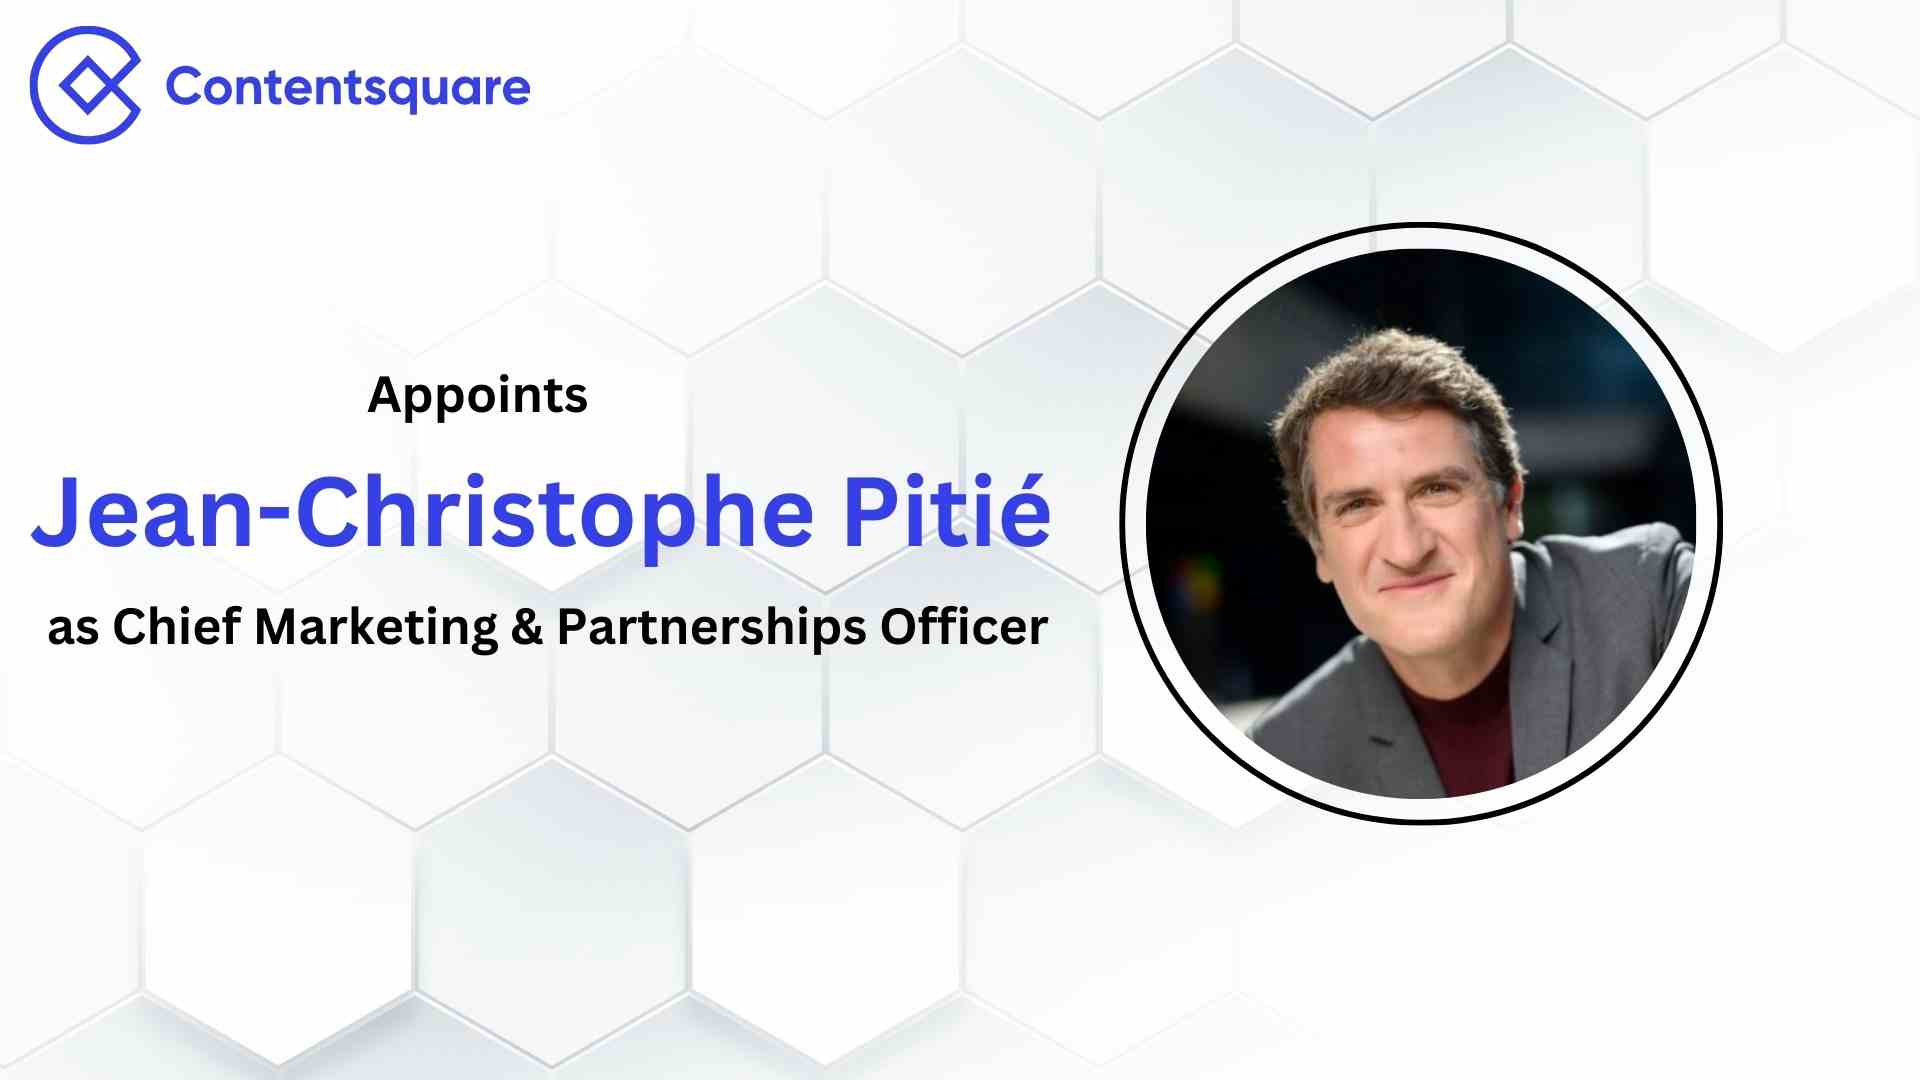 Contentsquare Appoints Jean-Christophe Pitié as Chief Marketing & Partnerships Officer